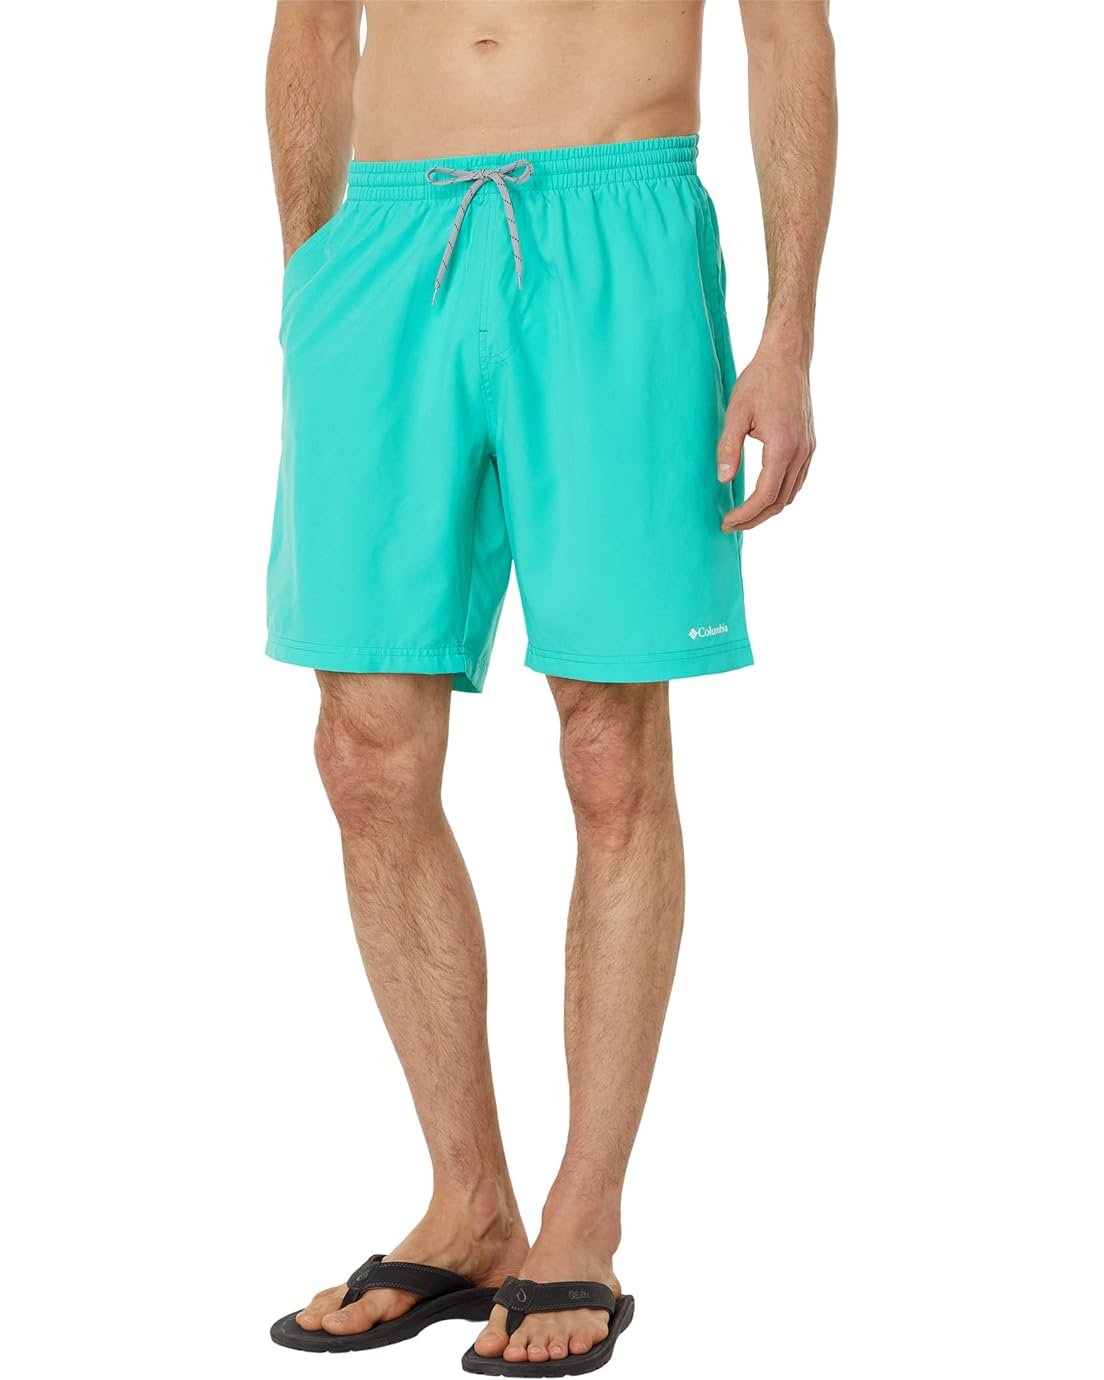 Columbia Summertide Stretch Shorts